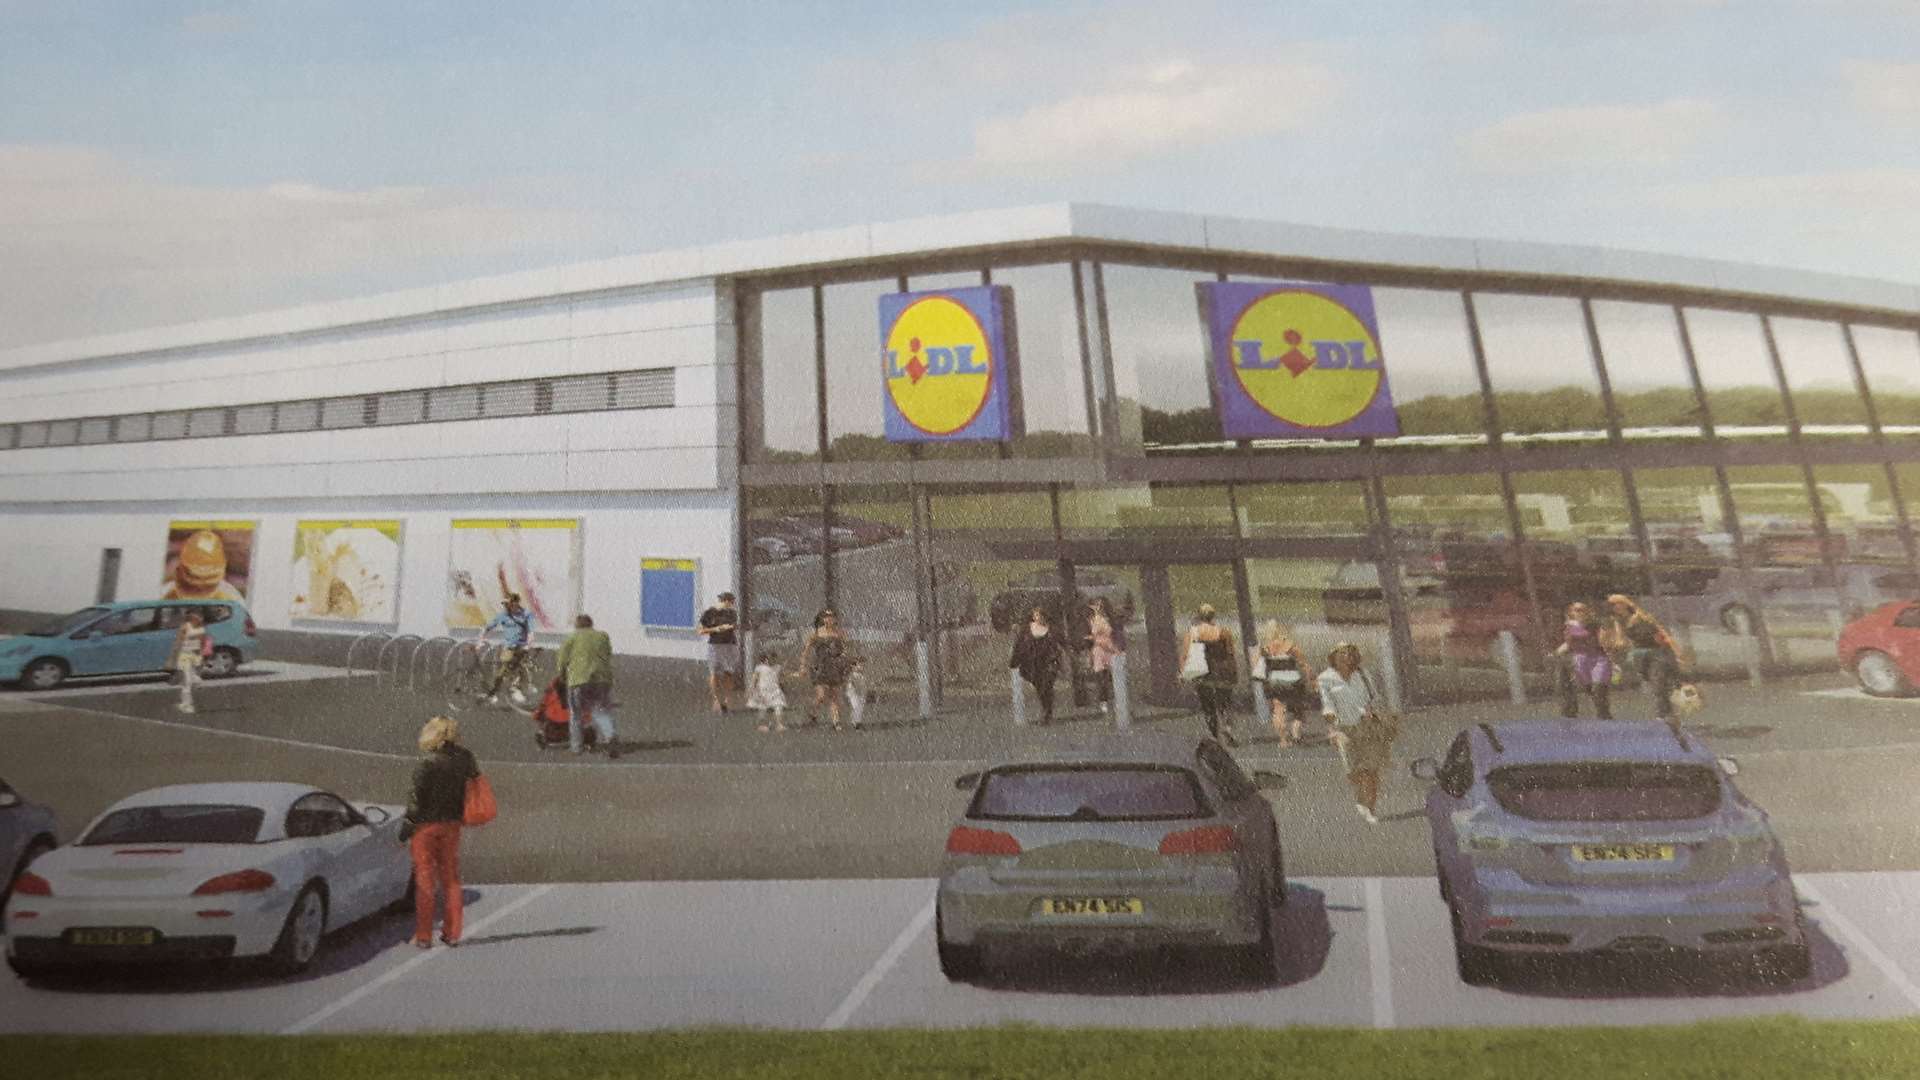 Artist's impression of the planned new Lidl foodstore in Dover